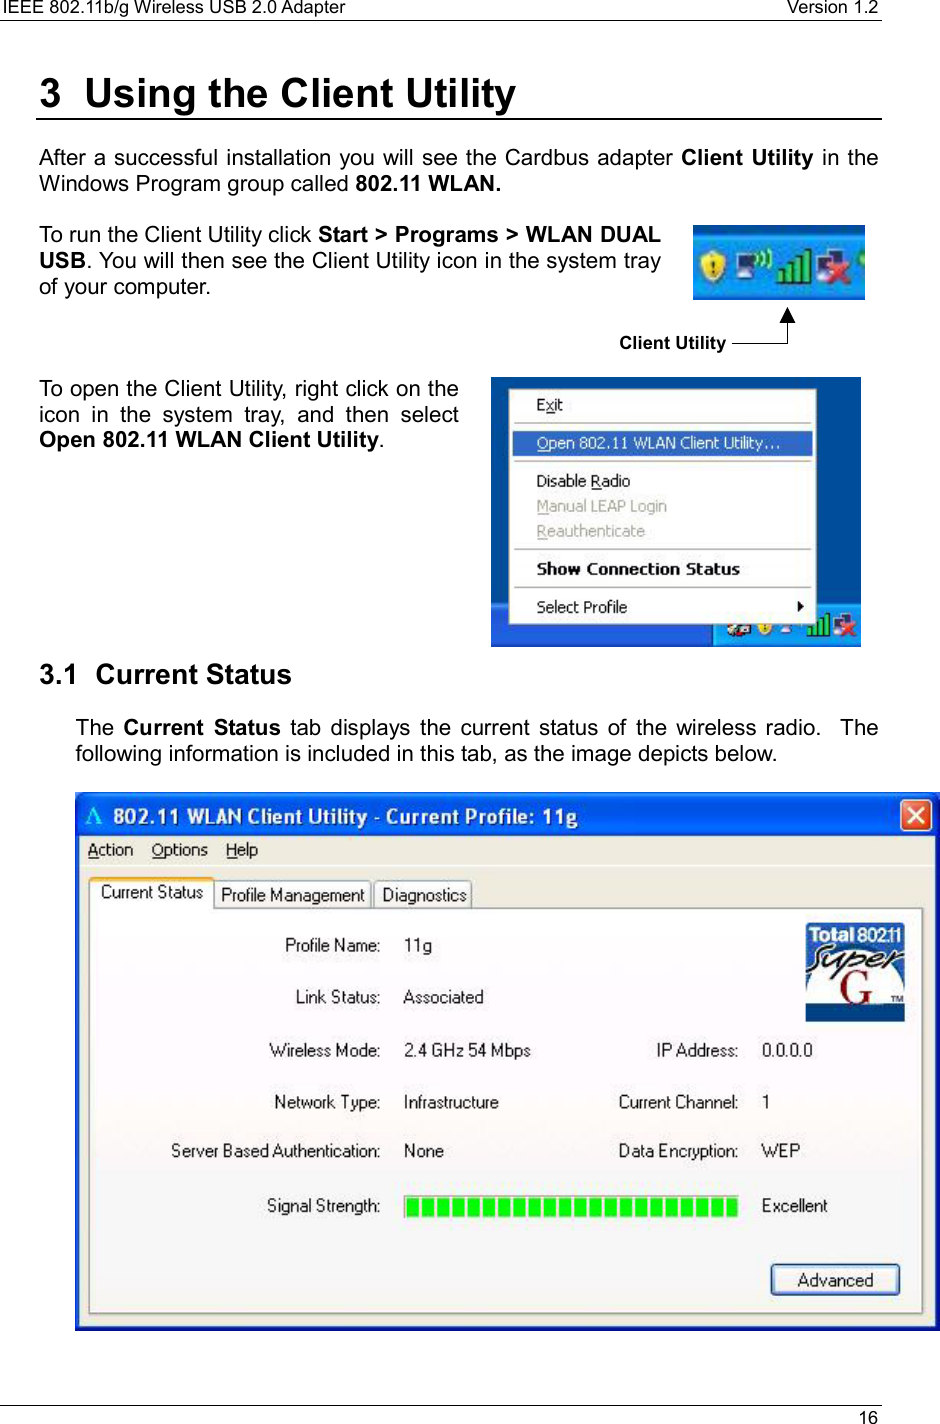 IEEE 802.11b/g Wireless USB 2.0 Adapter    Version 1.2   16  3  Using the Client Utility  After a successful installation you will see the Cardbus adapter Client Utility in the Windows Program group called 802.11 WLAN.   To run the Client Utility click Start &gt; Programs &gt; WLAN DUAL USB. You will then see the Client Utility icon in the system tray of your computer.     To open the Client Utility, right click on the icon in the system tray, and then select Open 802.11 WLAN Client Utility.           3.1 Current Status The  Current Status tab displays the current status of the wireless radio.  The following information is included in this tab, as the image depicts below.     Client Utility 